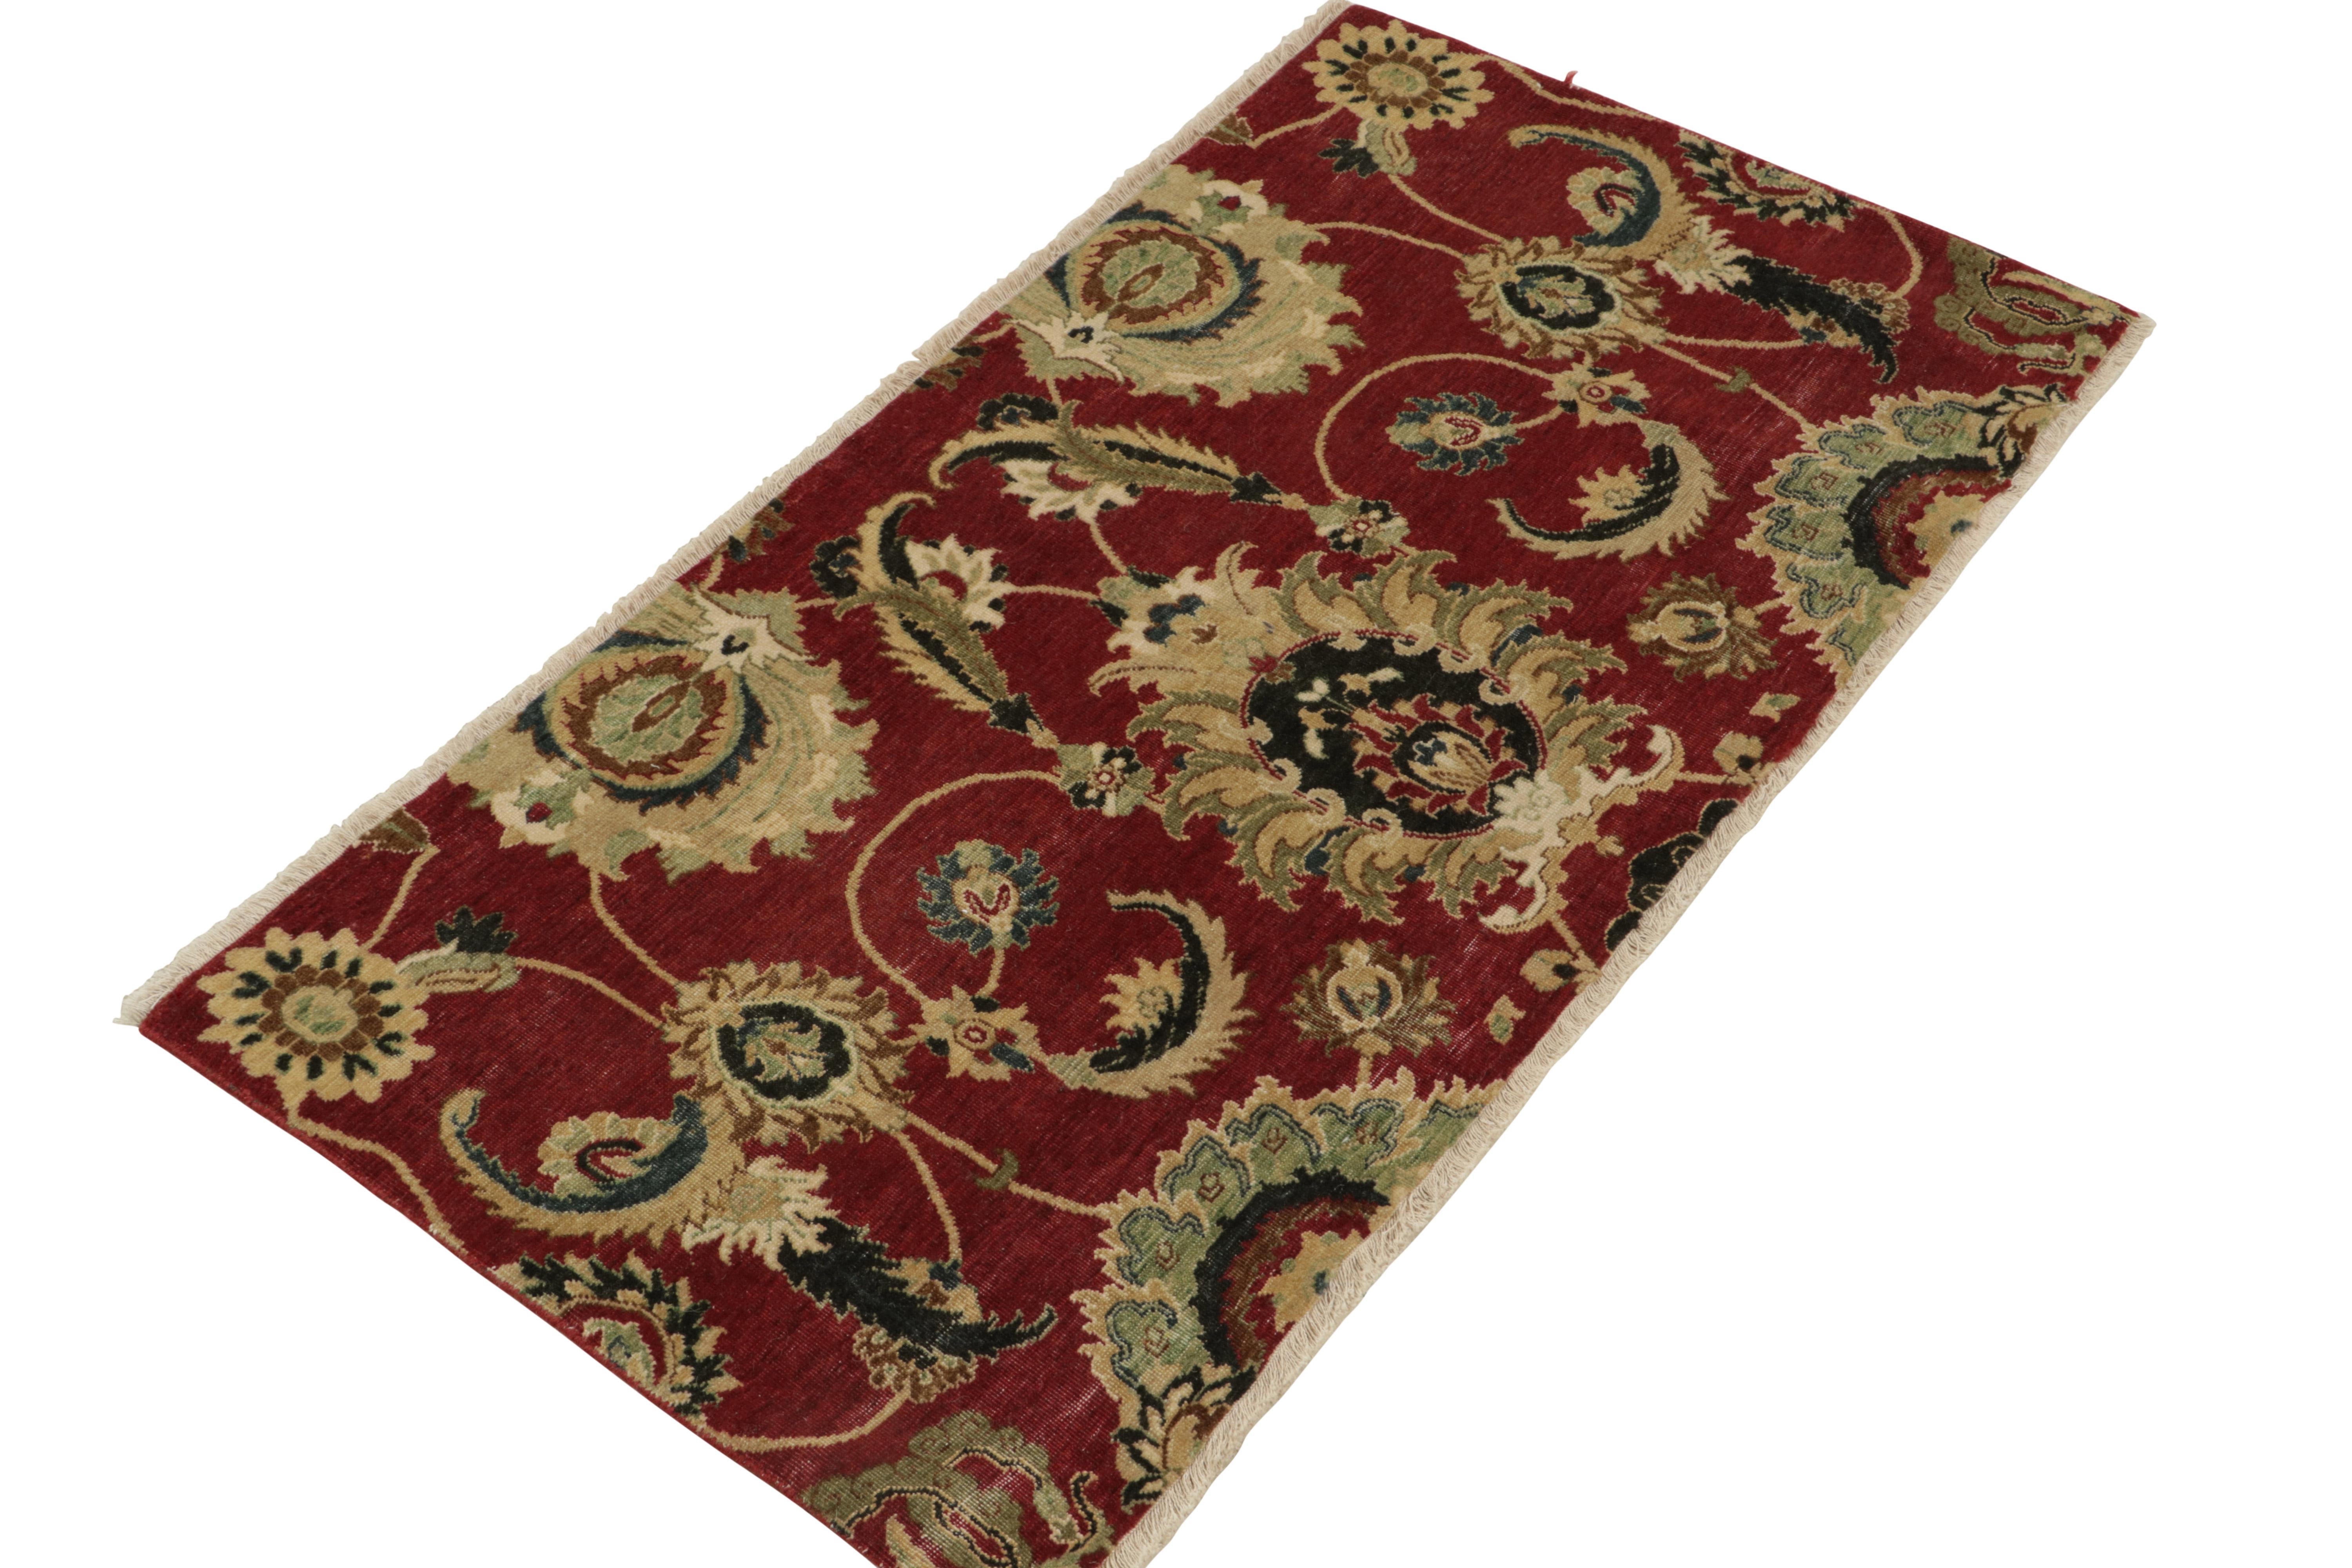 Indian Rug & Kilim's 17th-Century Inspired Rug in Burgundy, Gold & Green Florals For Sale